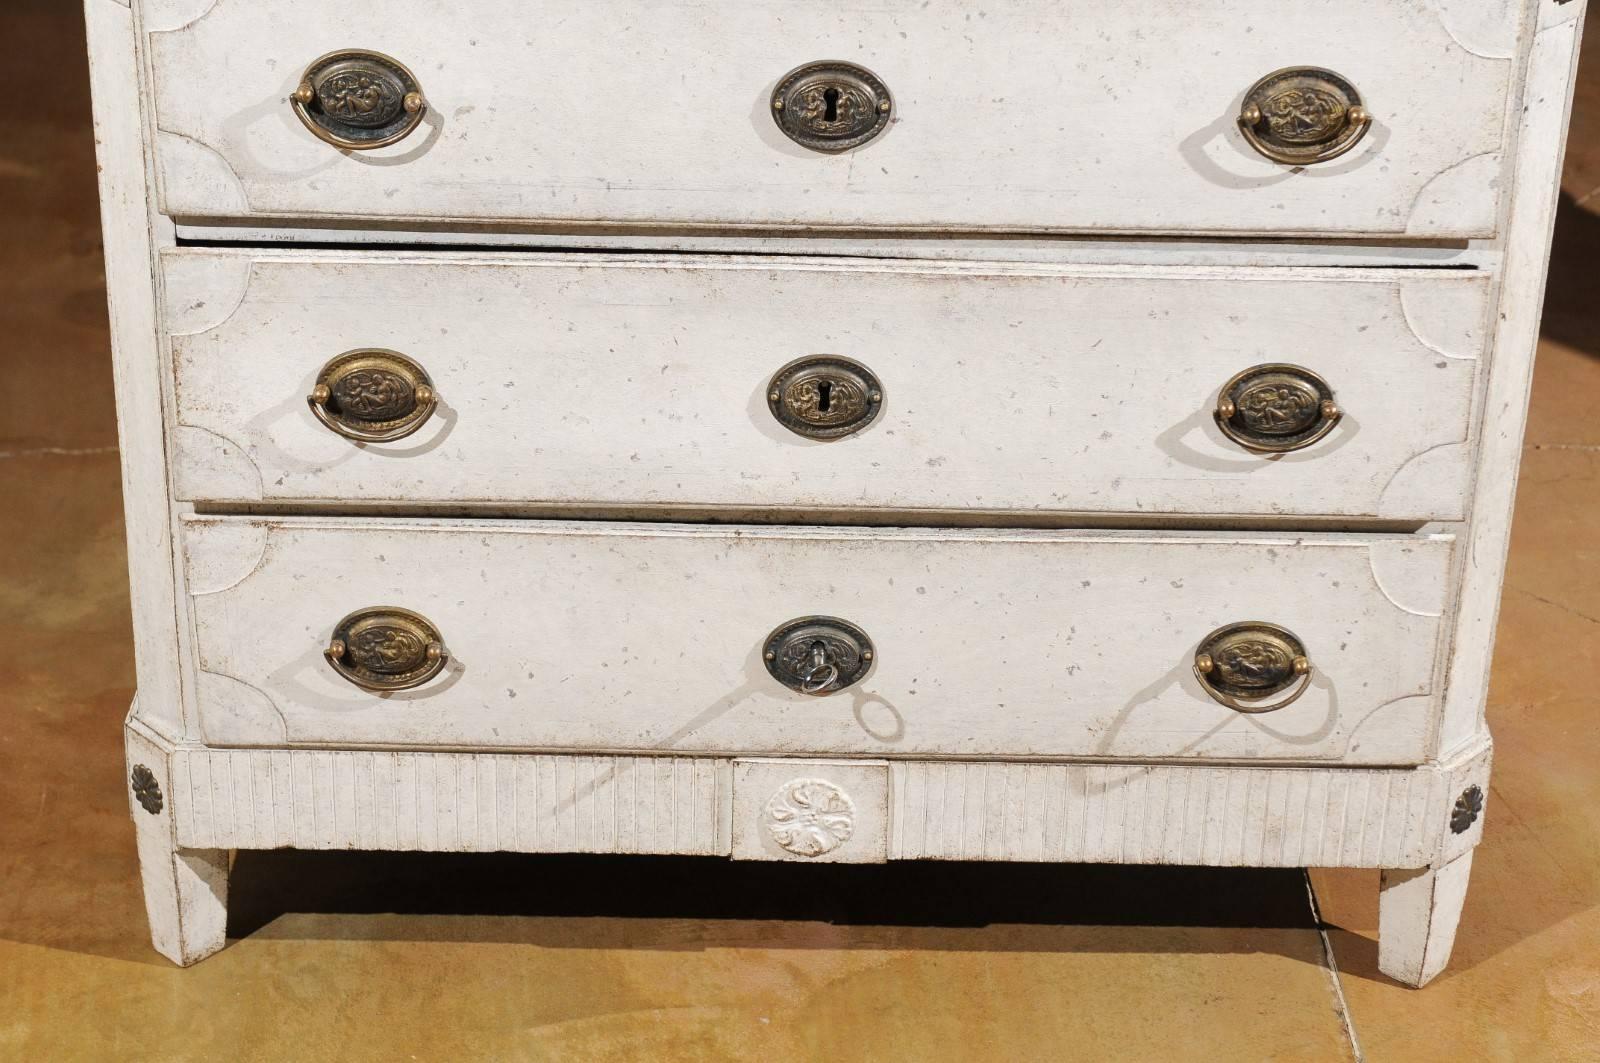 1810s Swedish Gustavian Period Painted Commode with Dentil Molding and Rosettes 4